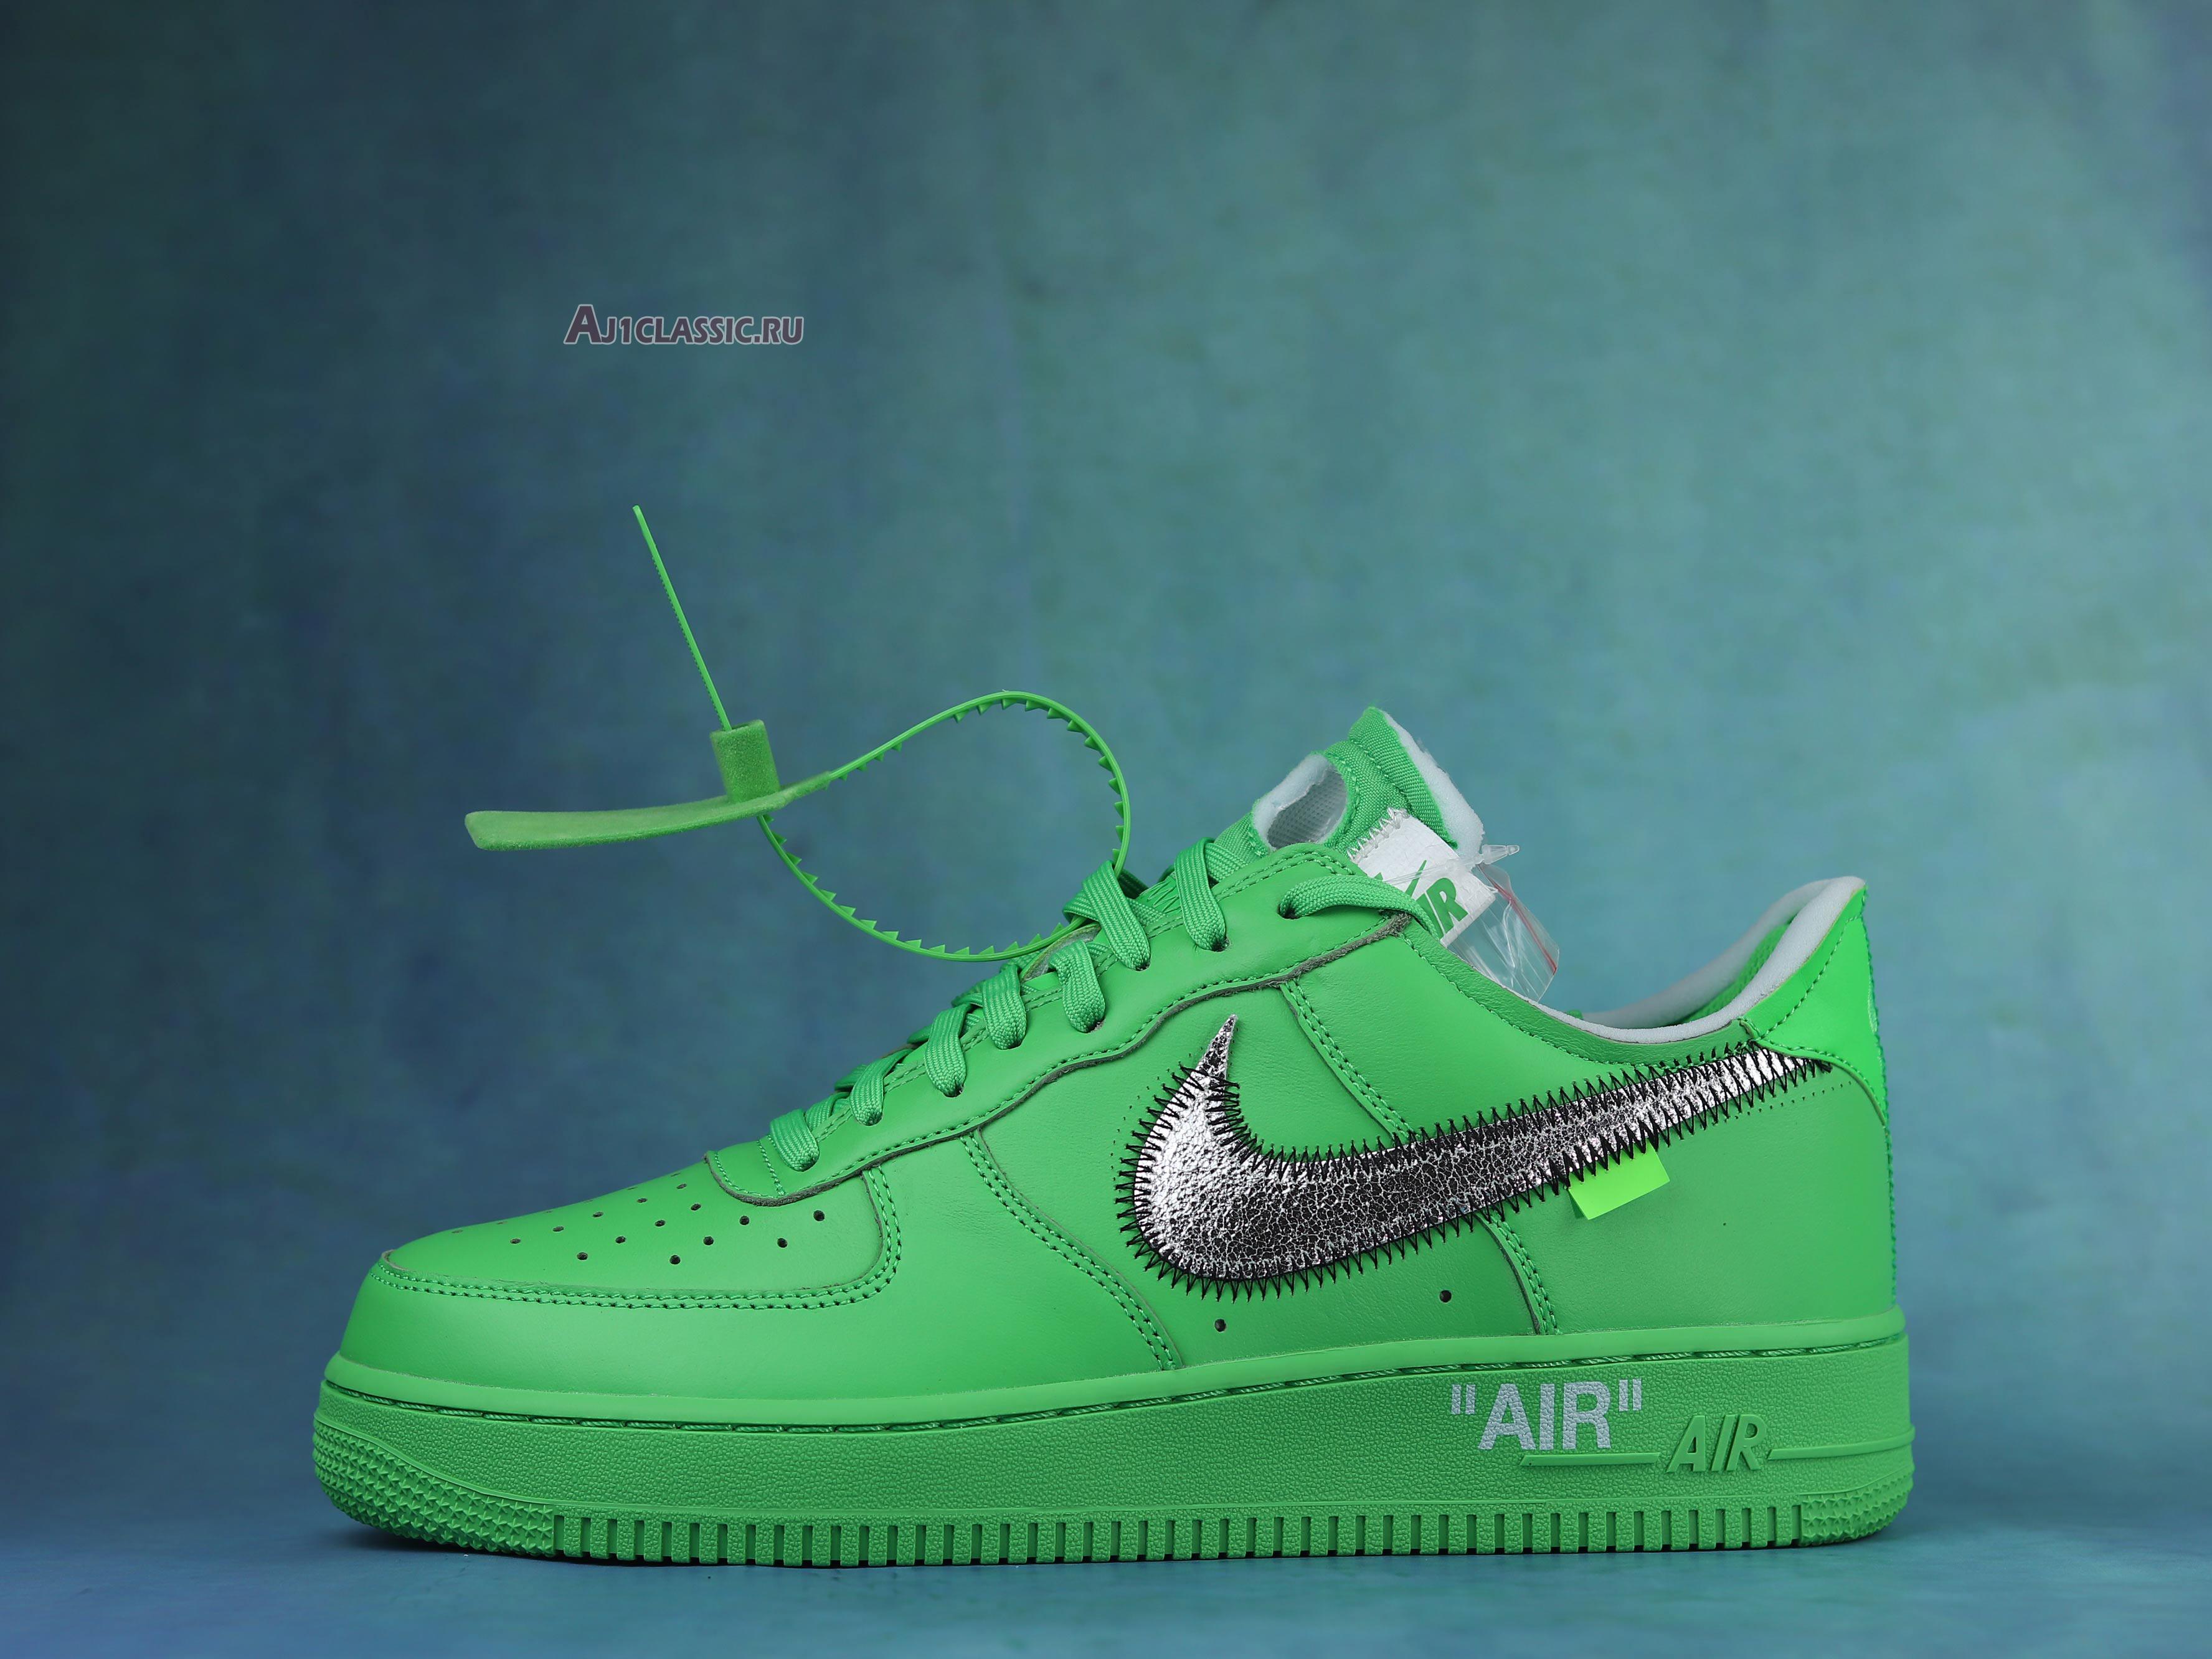 Off-White x Nike Air Force 1 Low "Brooklyn" DX1419-300